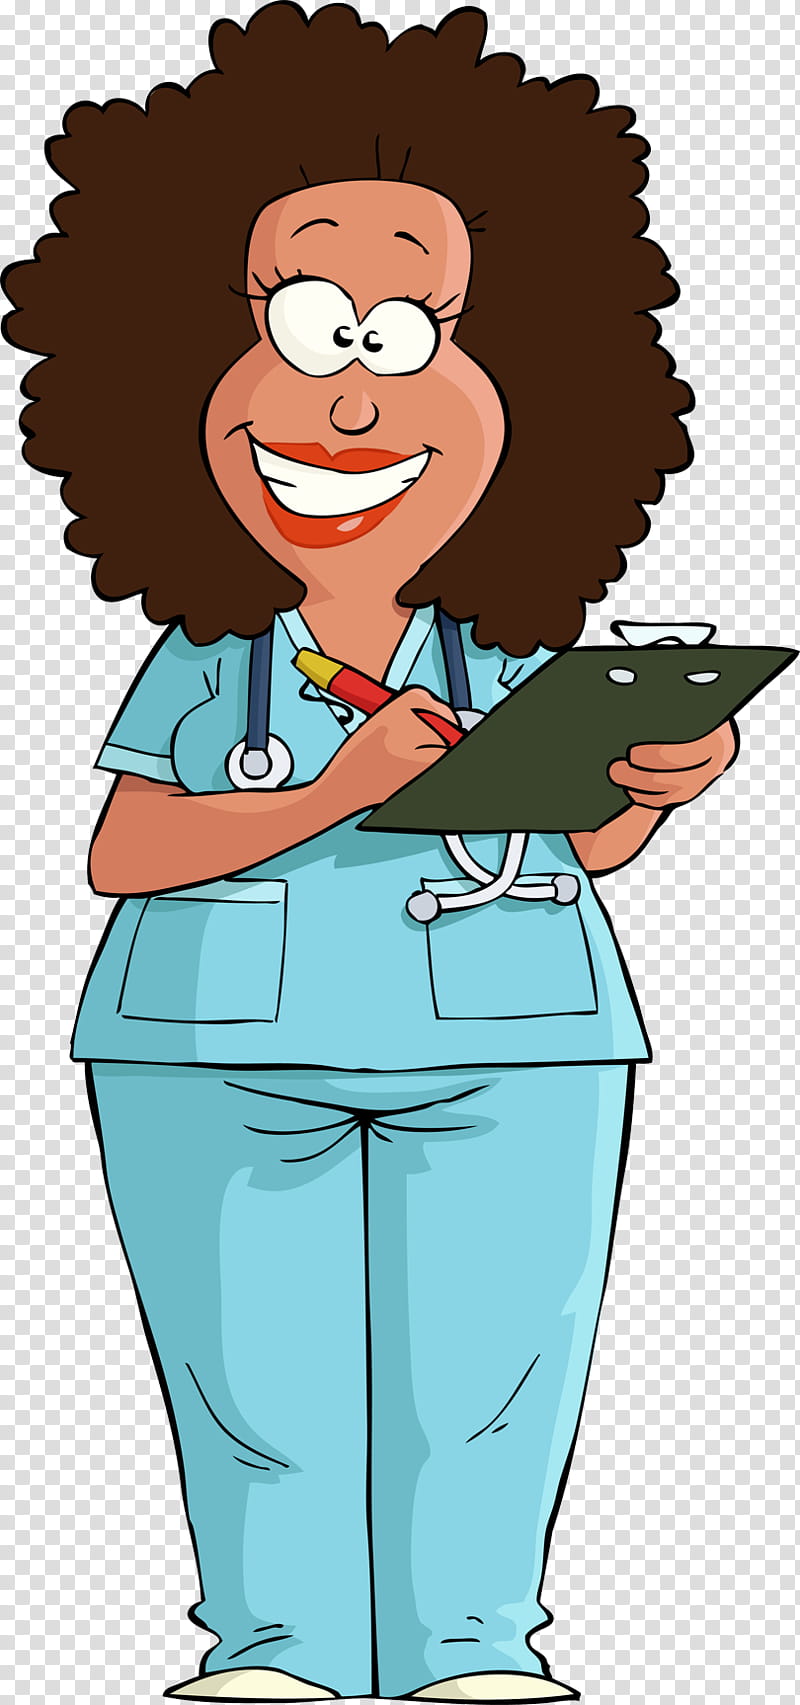 How to Draw a Nurse ❤️ Health Care Provider - YouTube